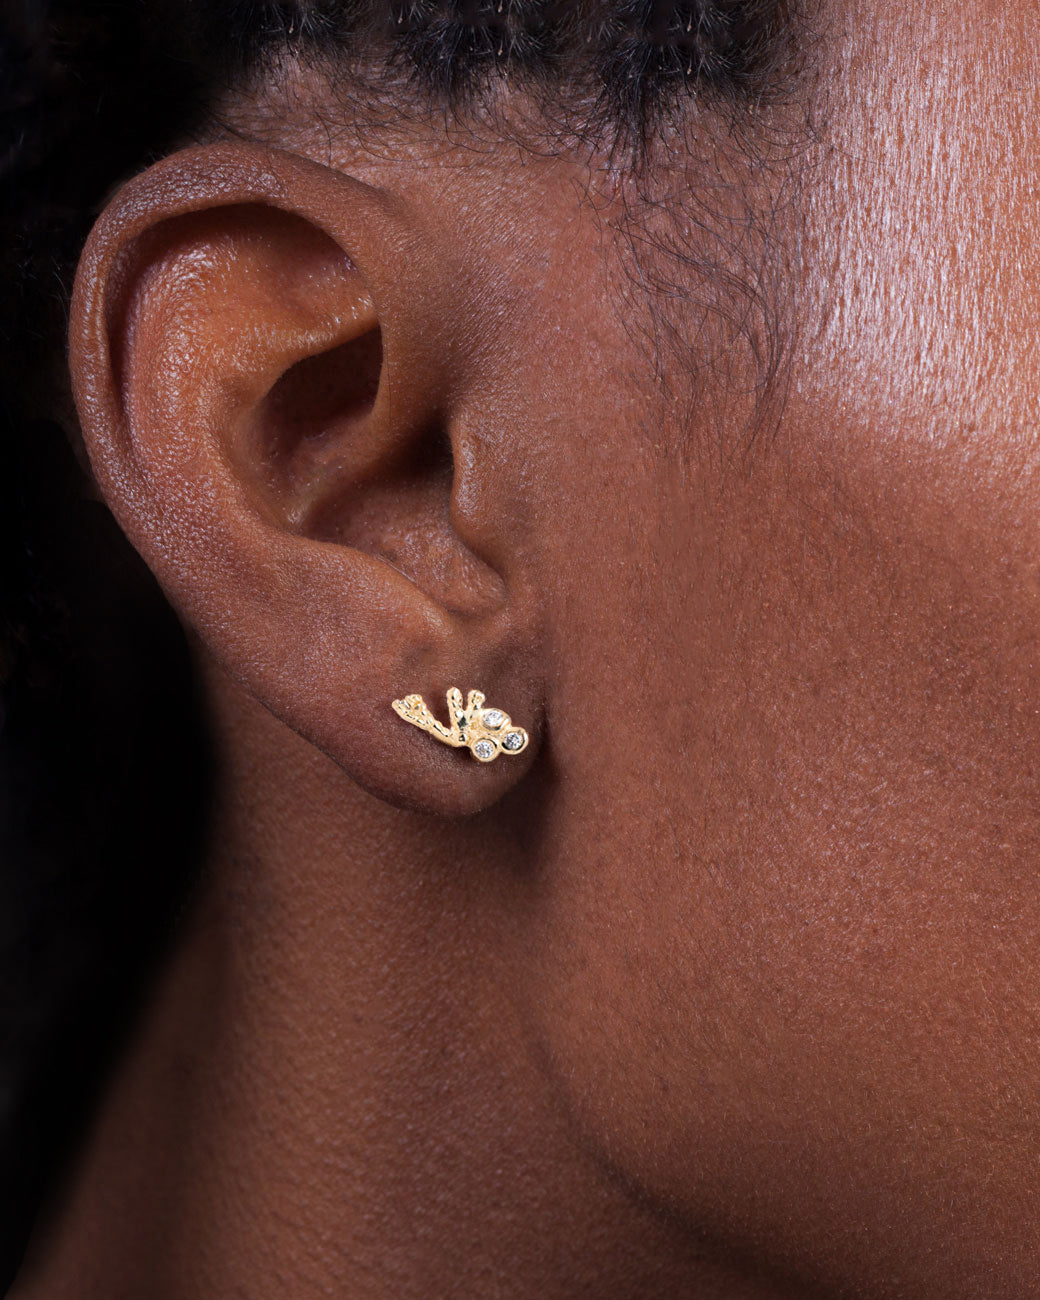 a womans ear wearing the branch and diamond earring studs. they sit flush to her lobe.